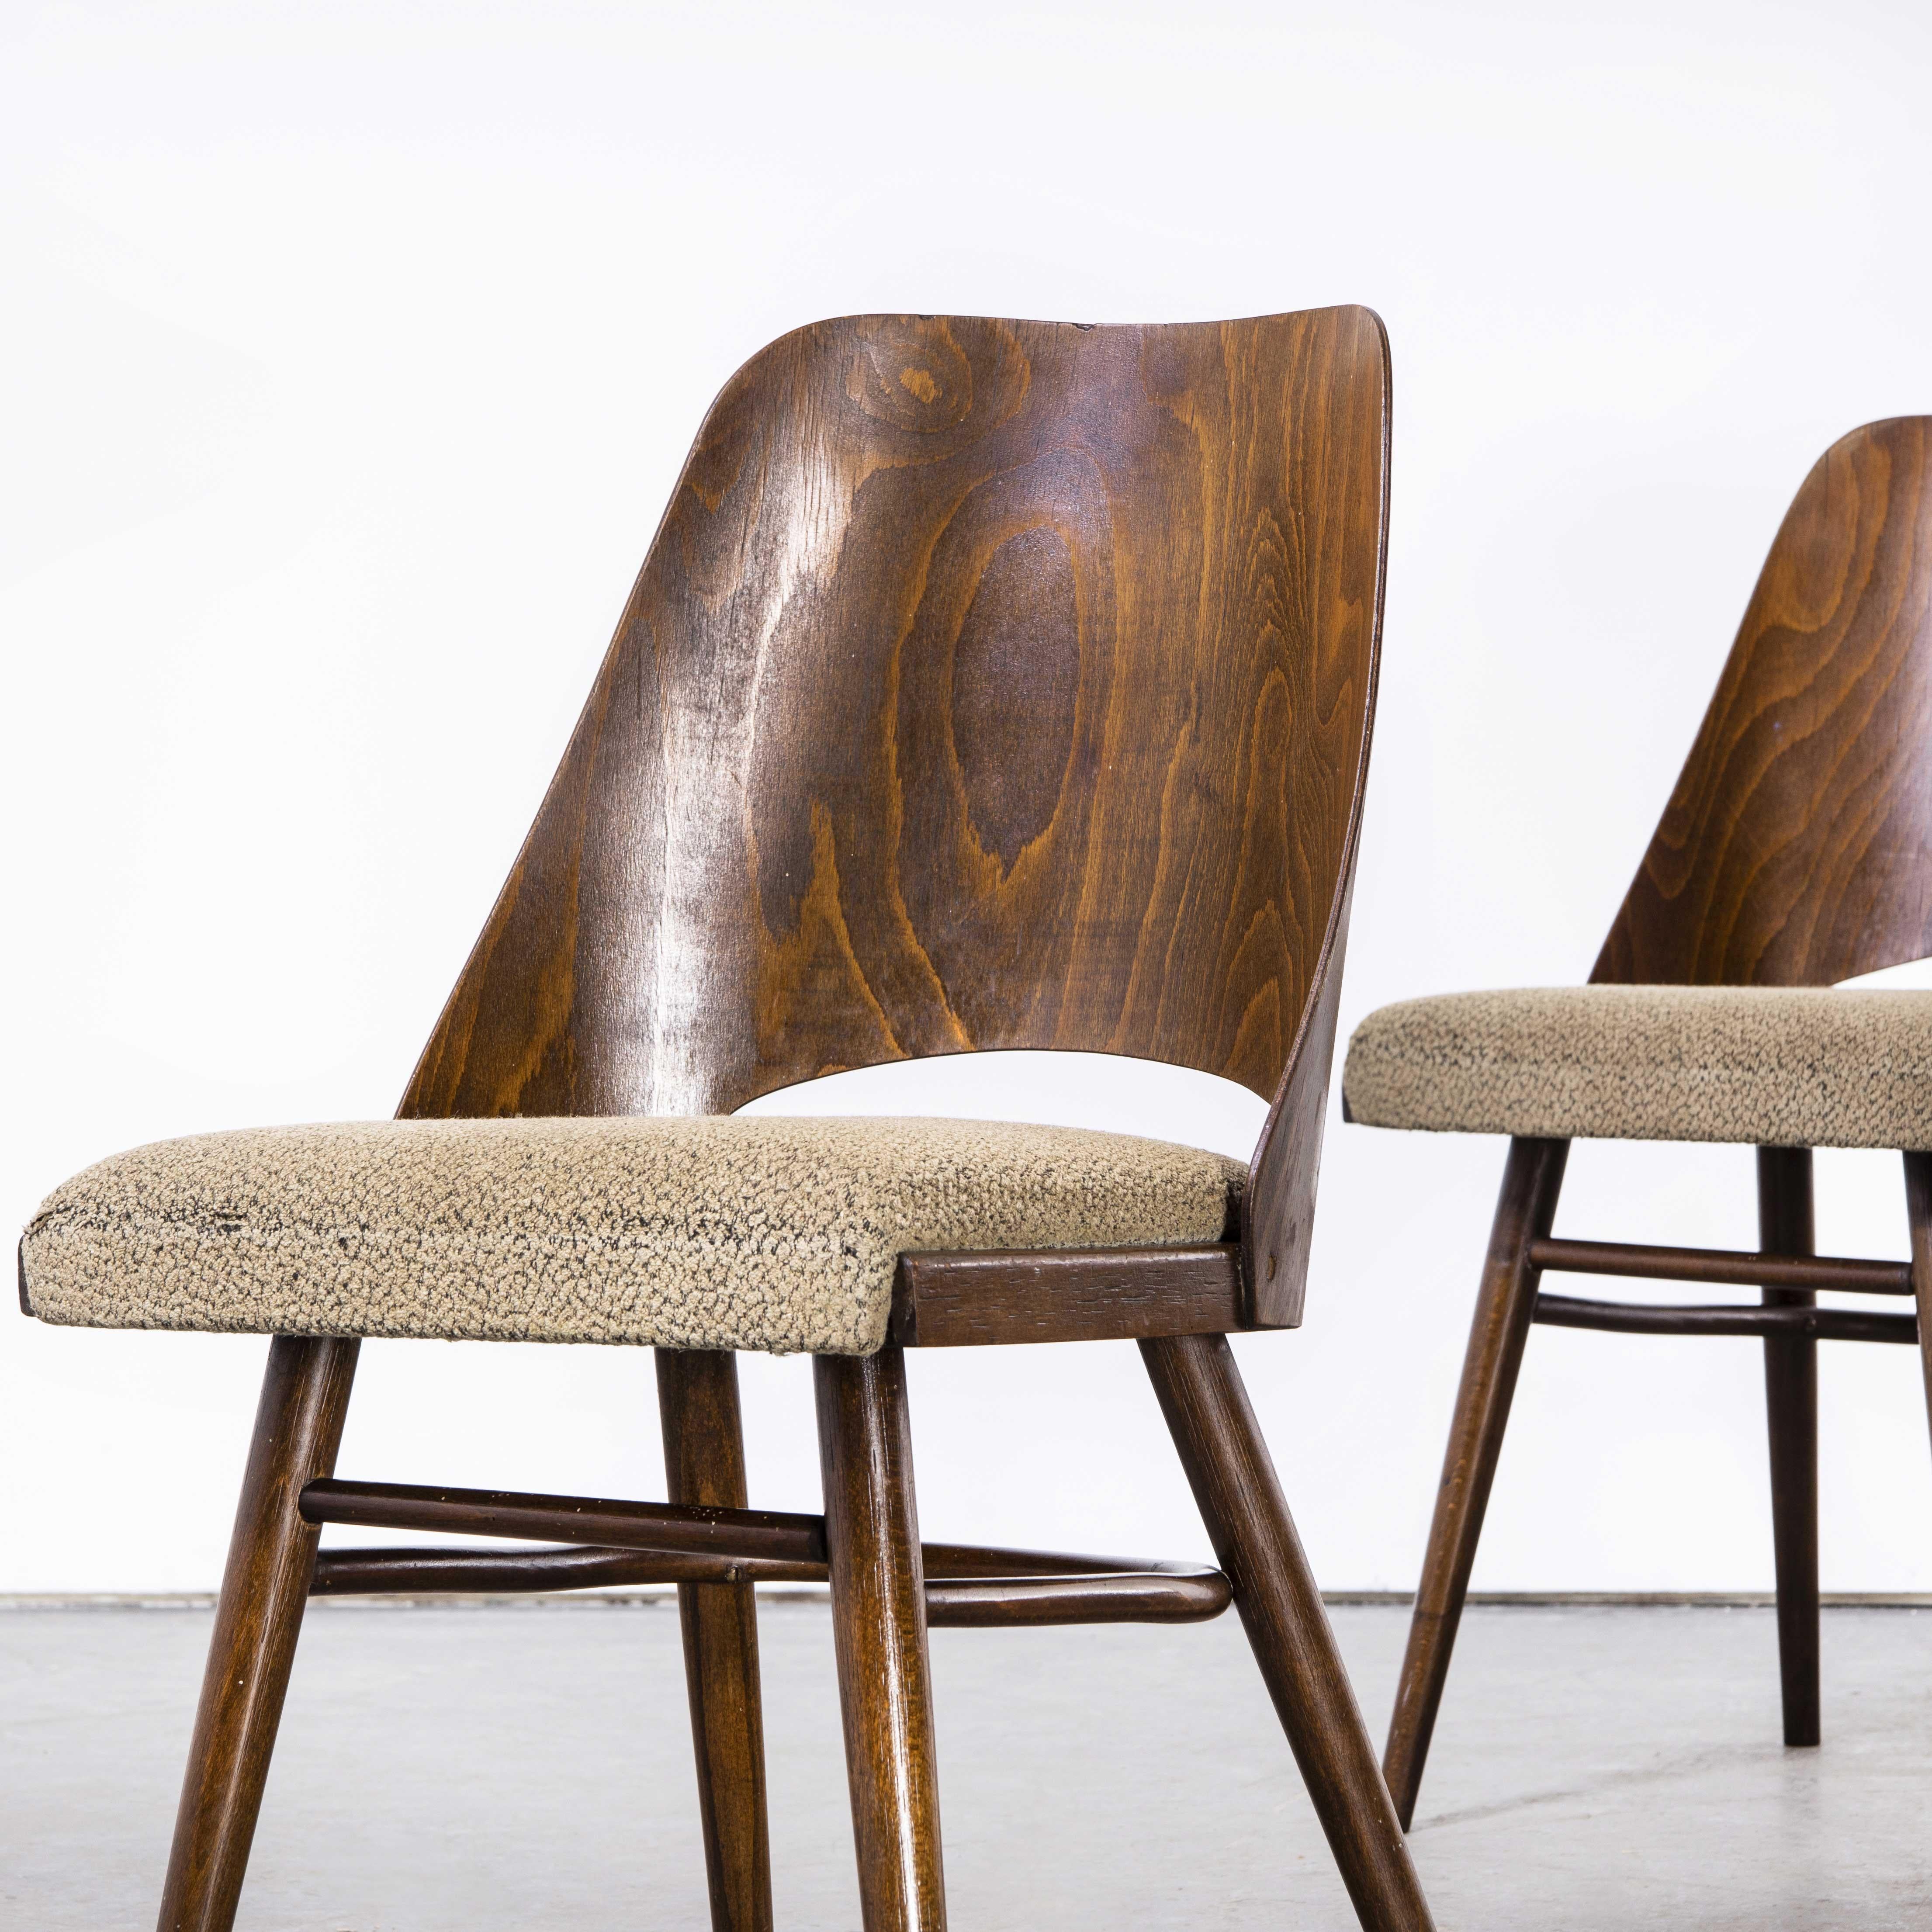 1950's Upholstered Thon Dining Chairs by Radomir Hoffman, Set of Four Dark Waln For Sale 4